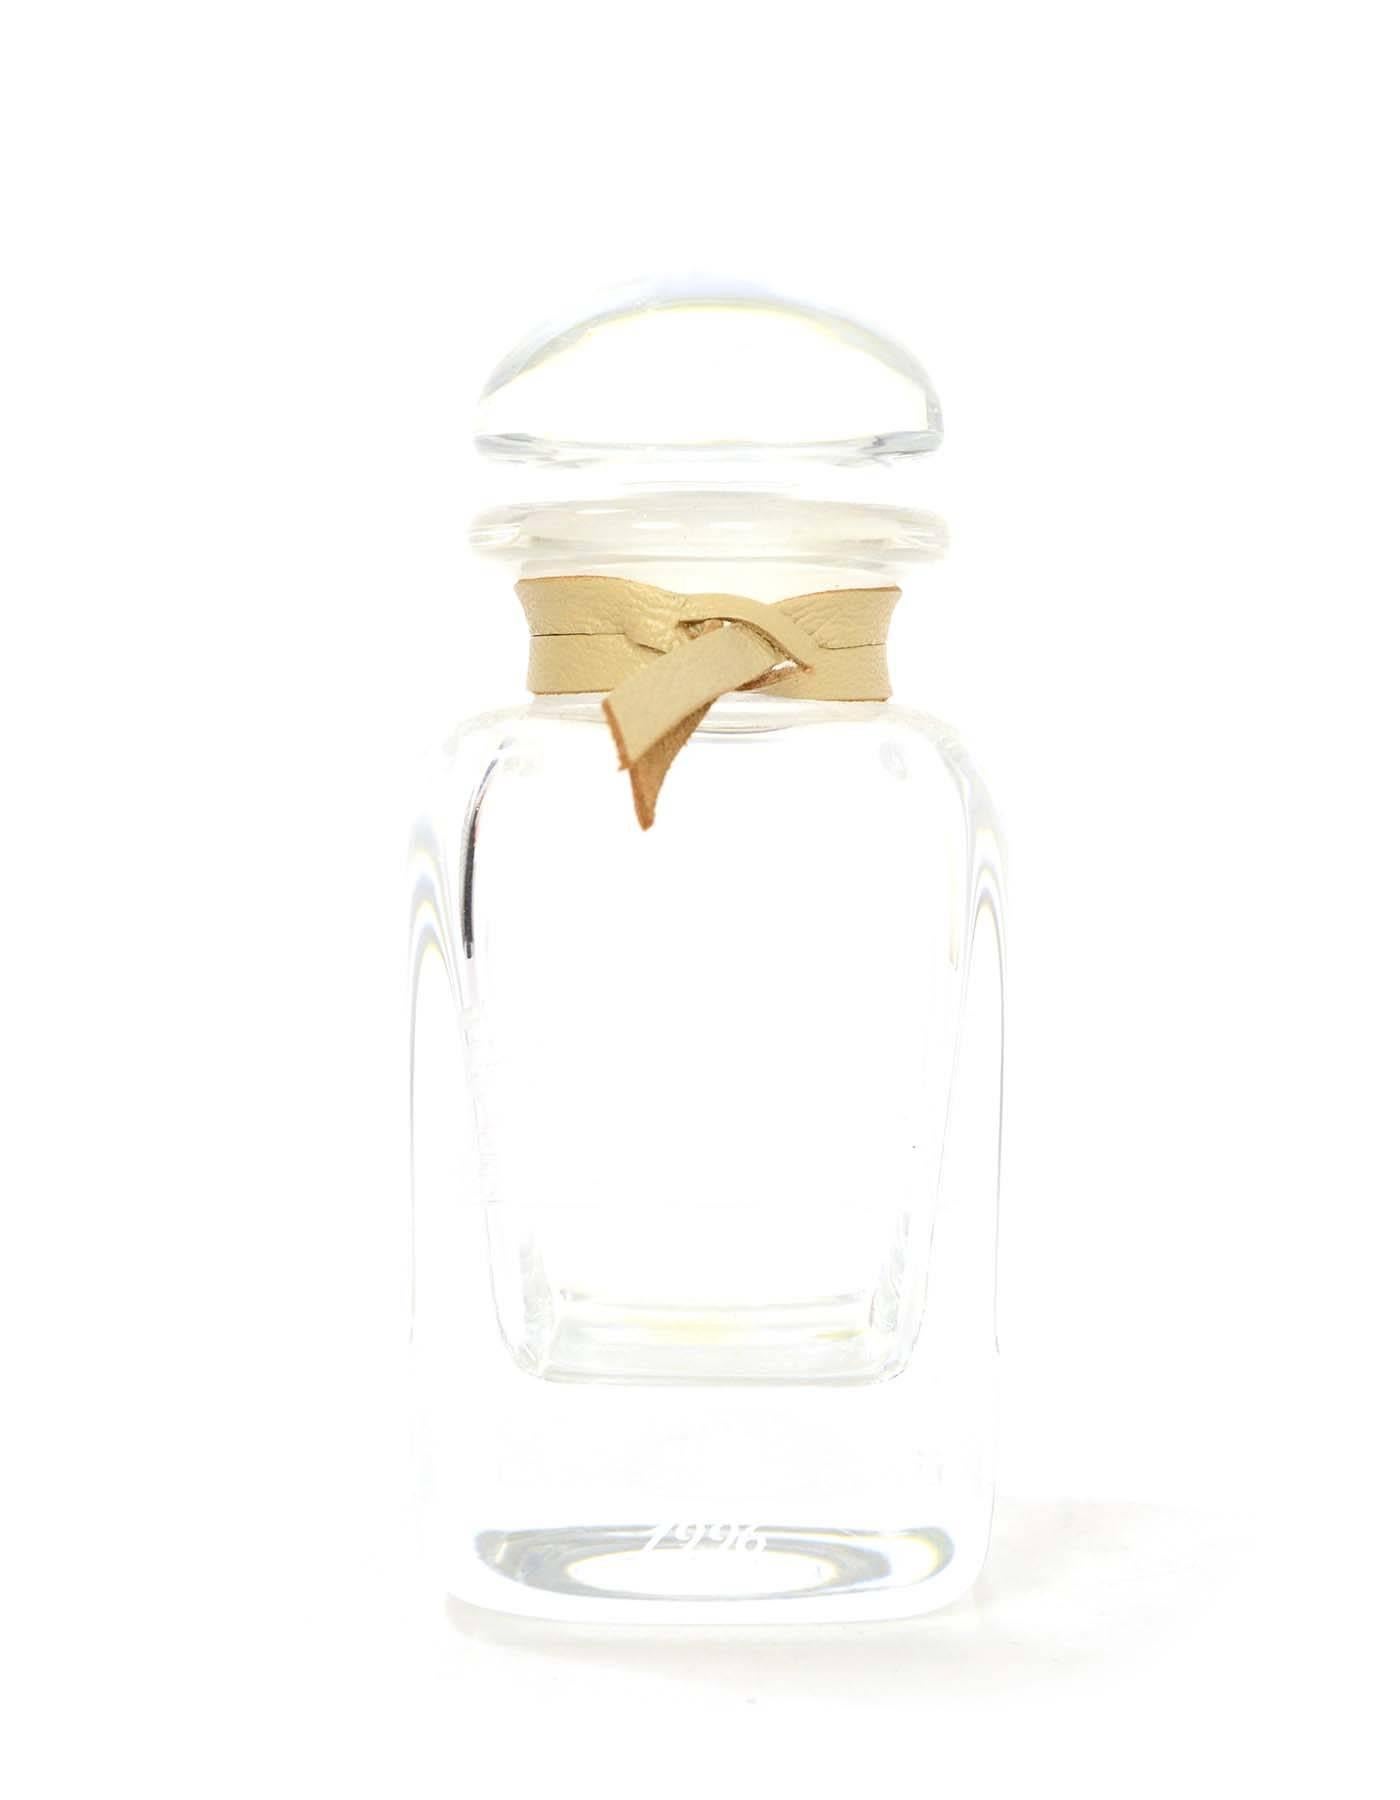 Hermes Ltd Ed. Glass Eau D'Hermes 1996 Perfume Bottle 
Features tan leather cord wrapped around neck of bottle
Holds 4 FL OZ
Made In: France
Year of Production: 1996
Color: Clear
Materials: Glass
Closure: Glass bottle top
Stamp: Eau De